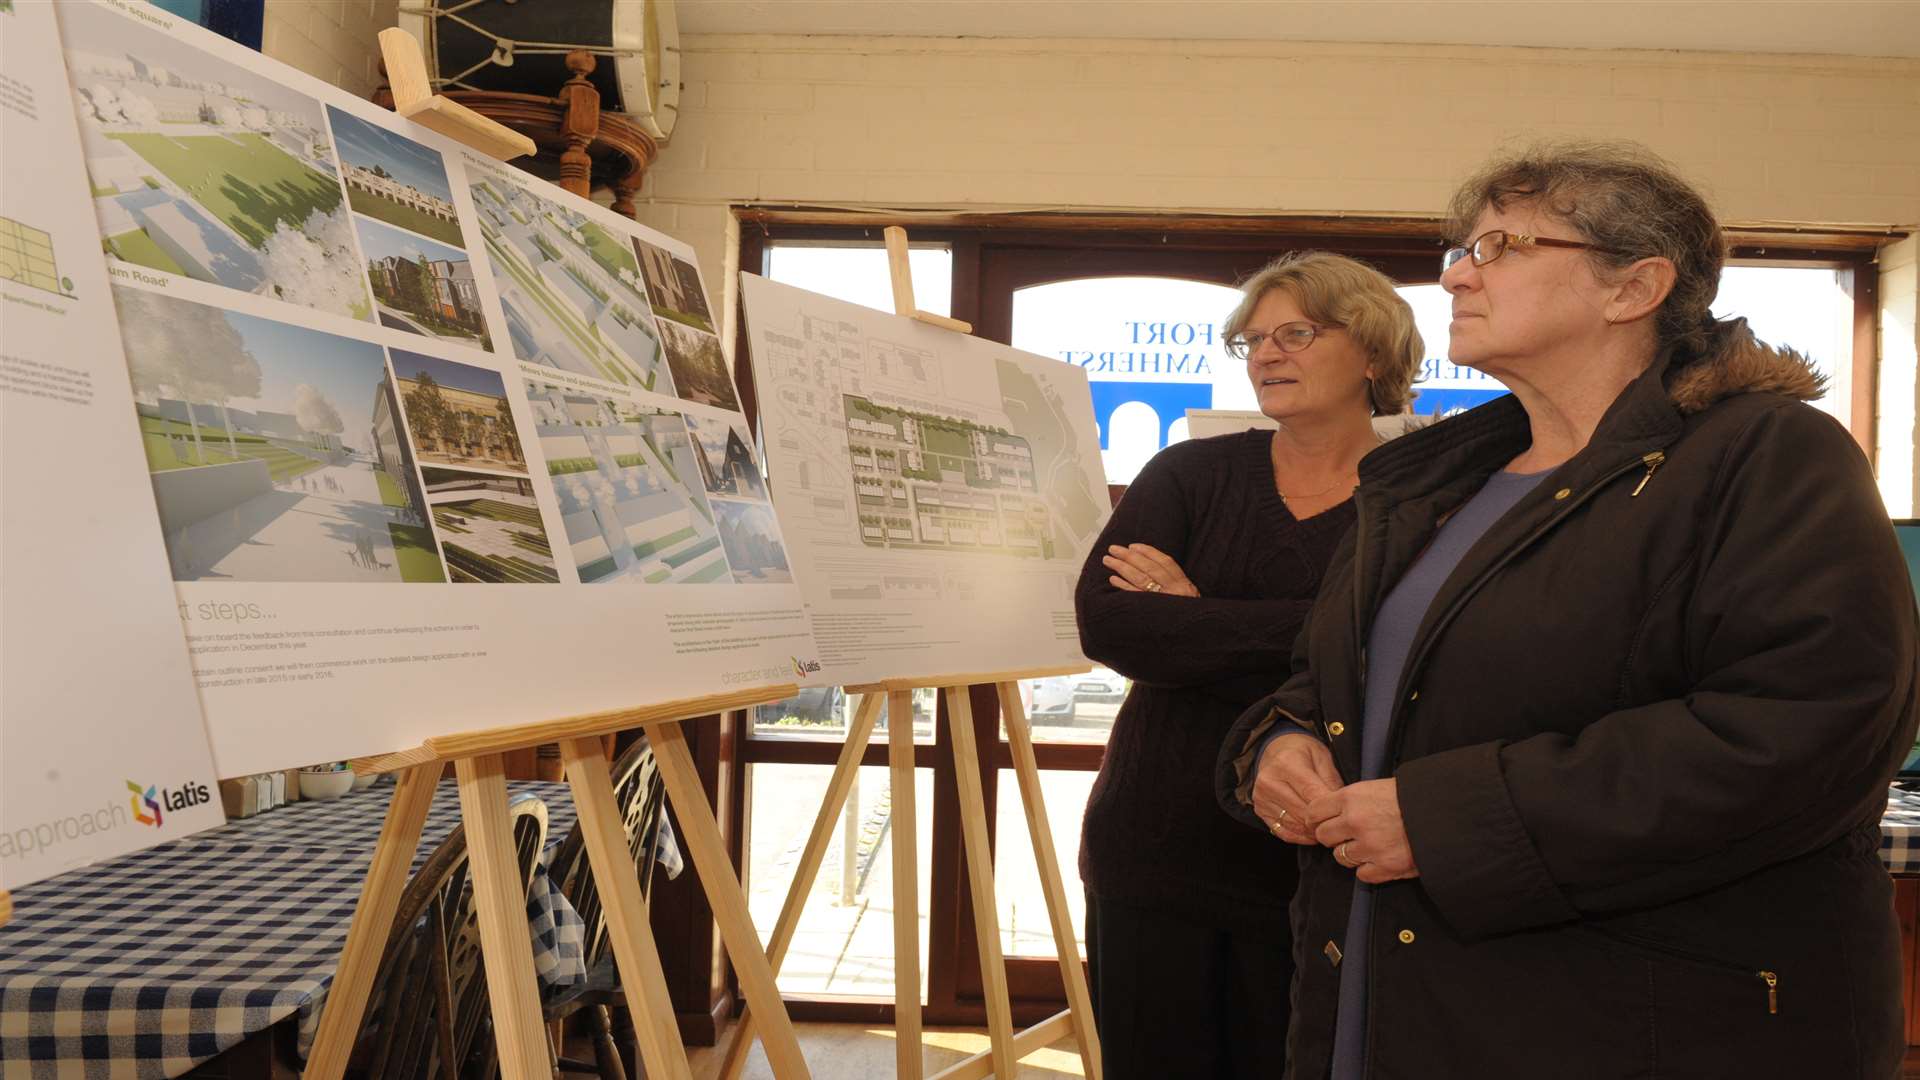 Carlee Darby and Gaynor Blackburn looking at the proposals at Fort Amherst on Tuesday. Picture: Steve Crispe.